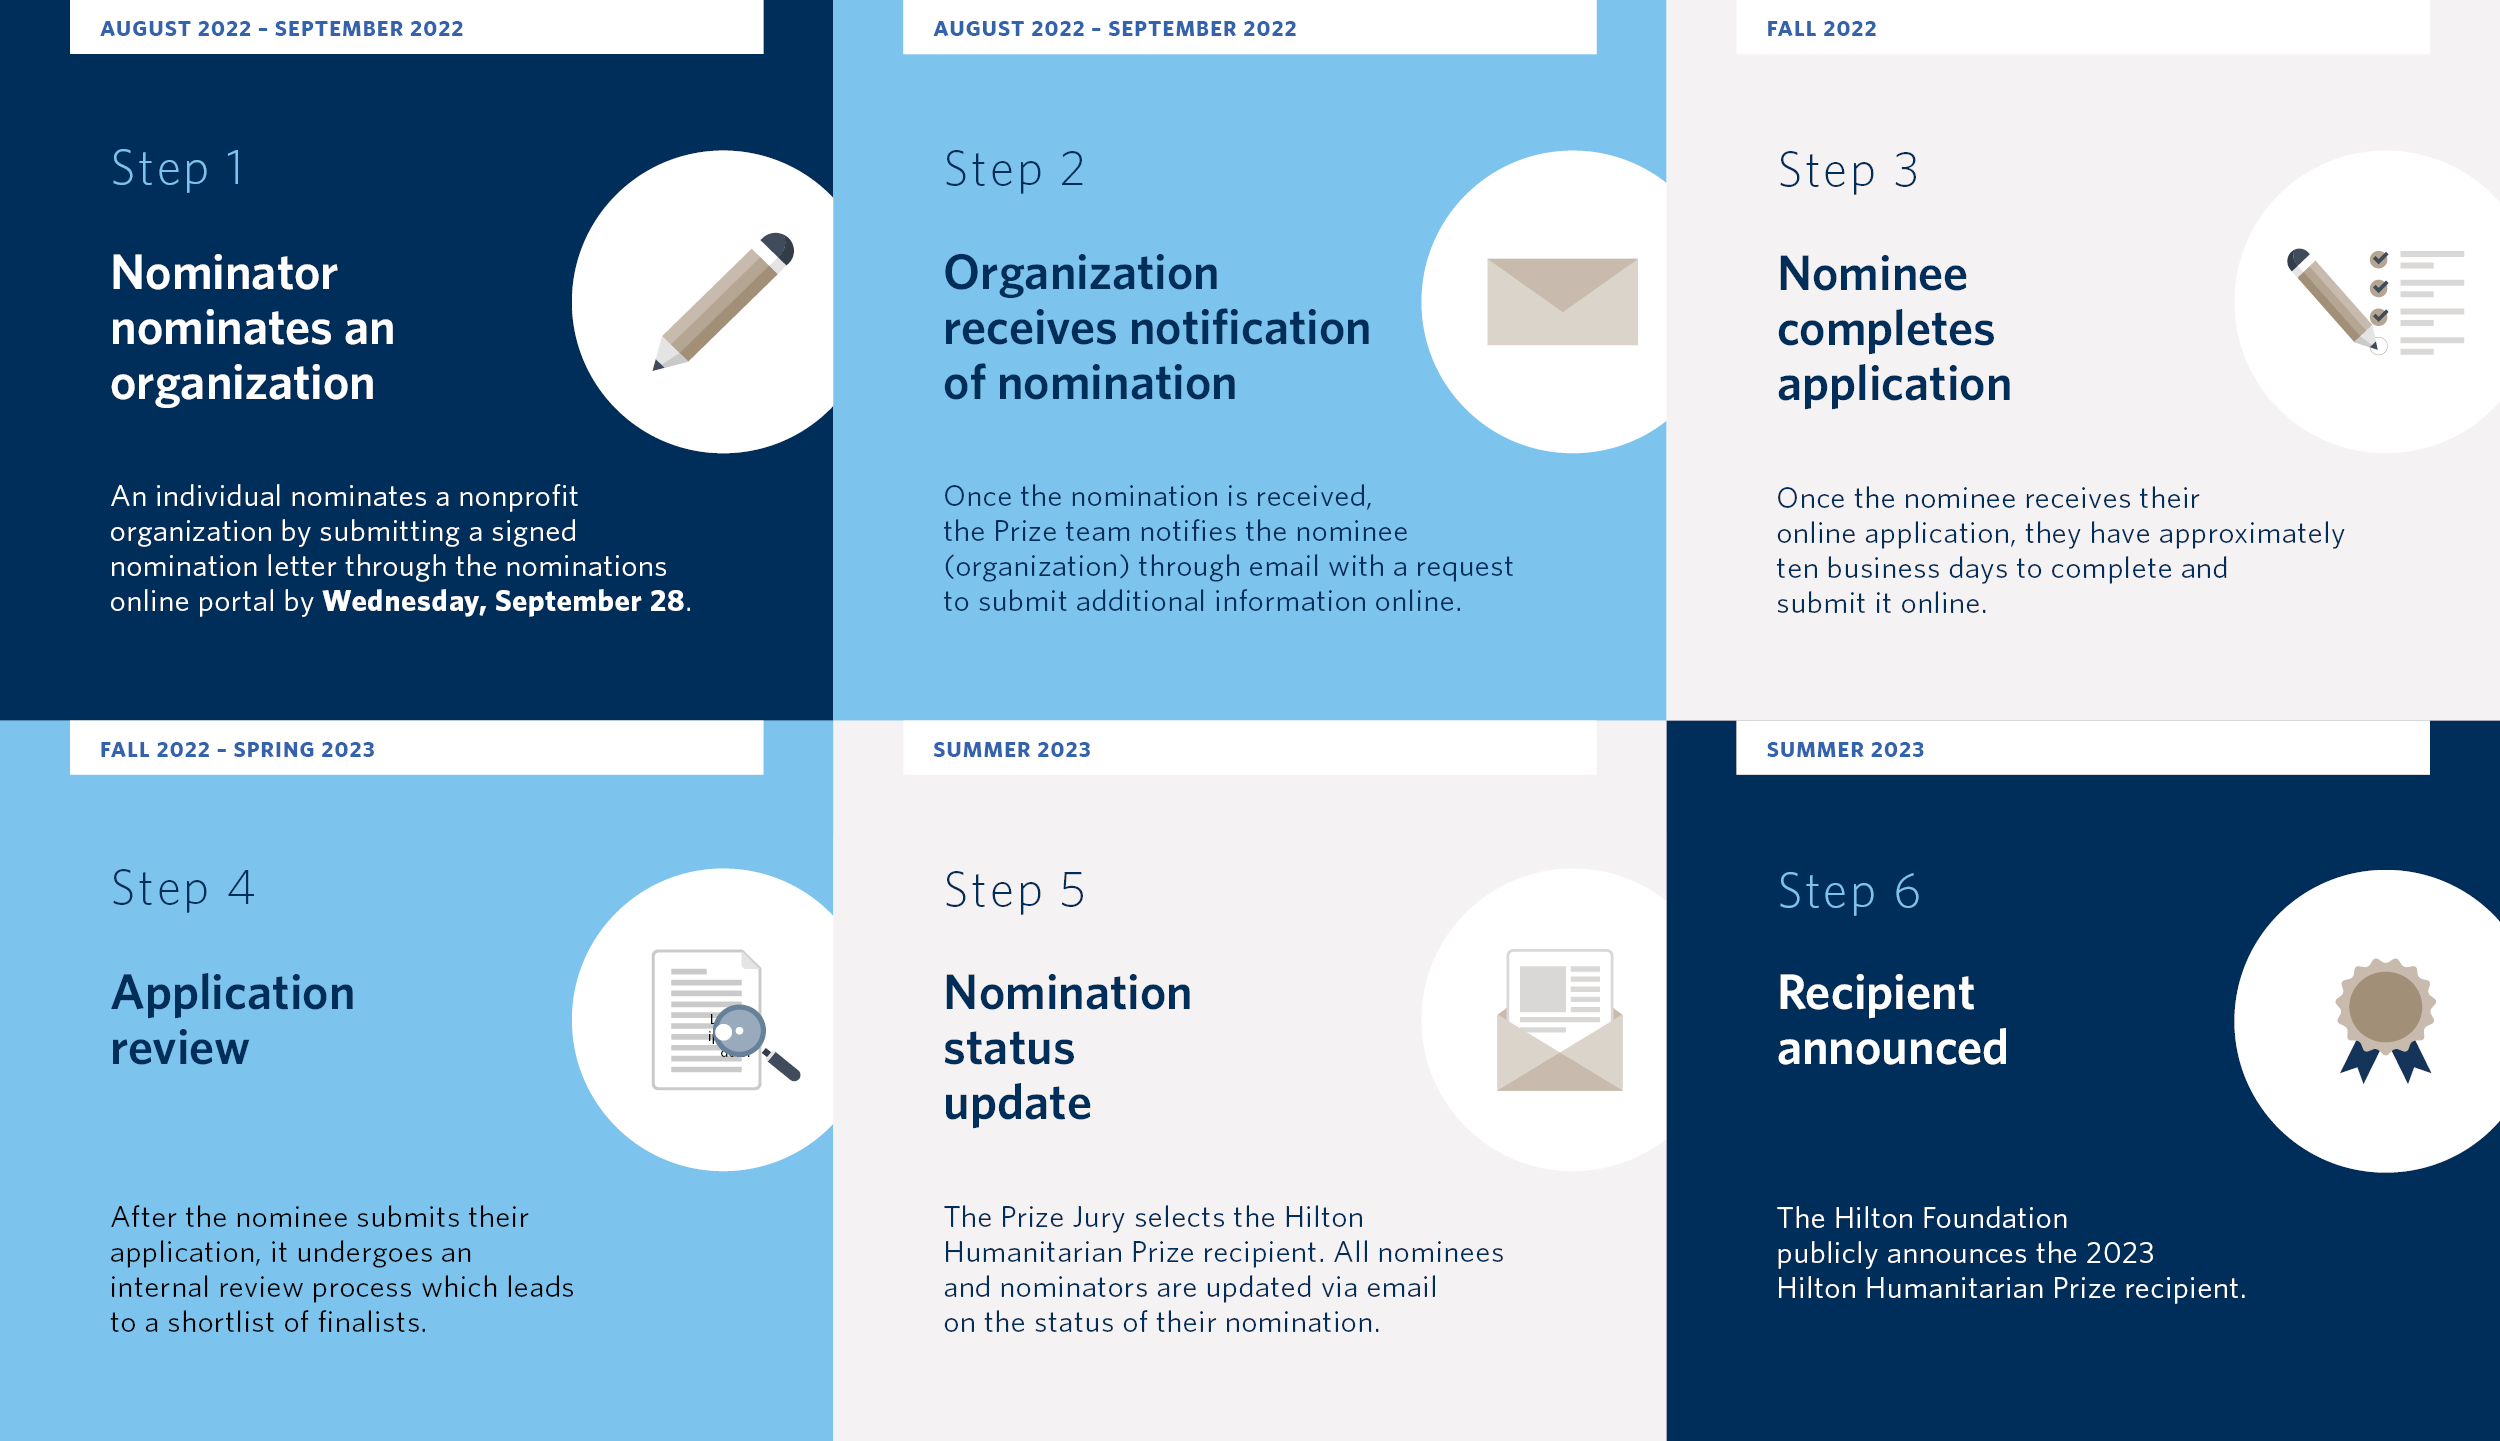 The steps from nomination to announcement of the recipient of the Hilton Humanitarian Prize is outlined in this image. The steps are also in the text of this page.